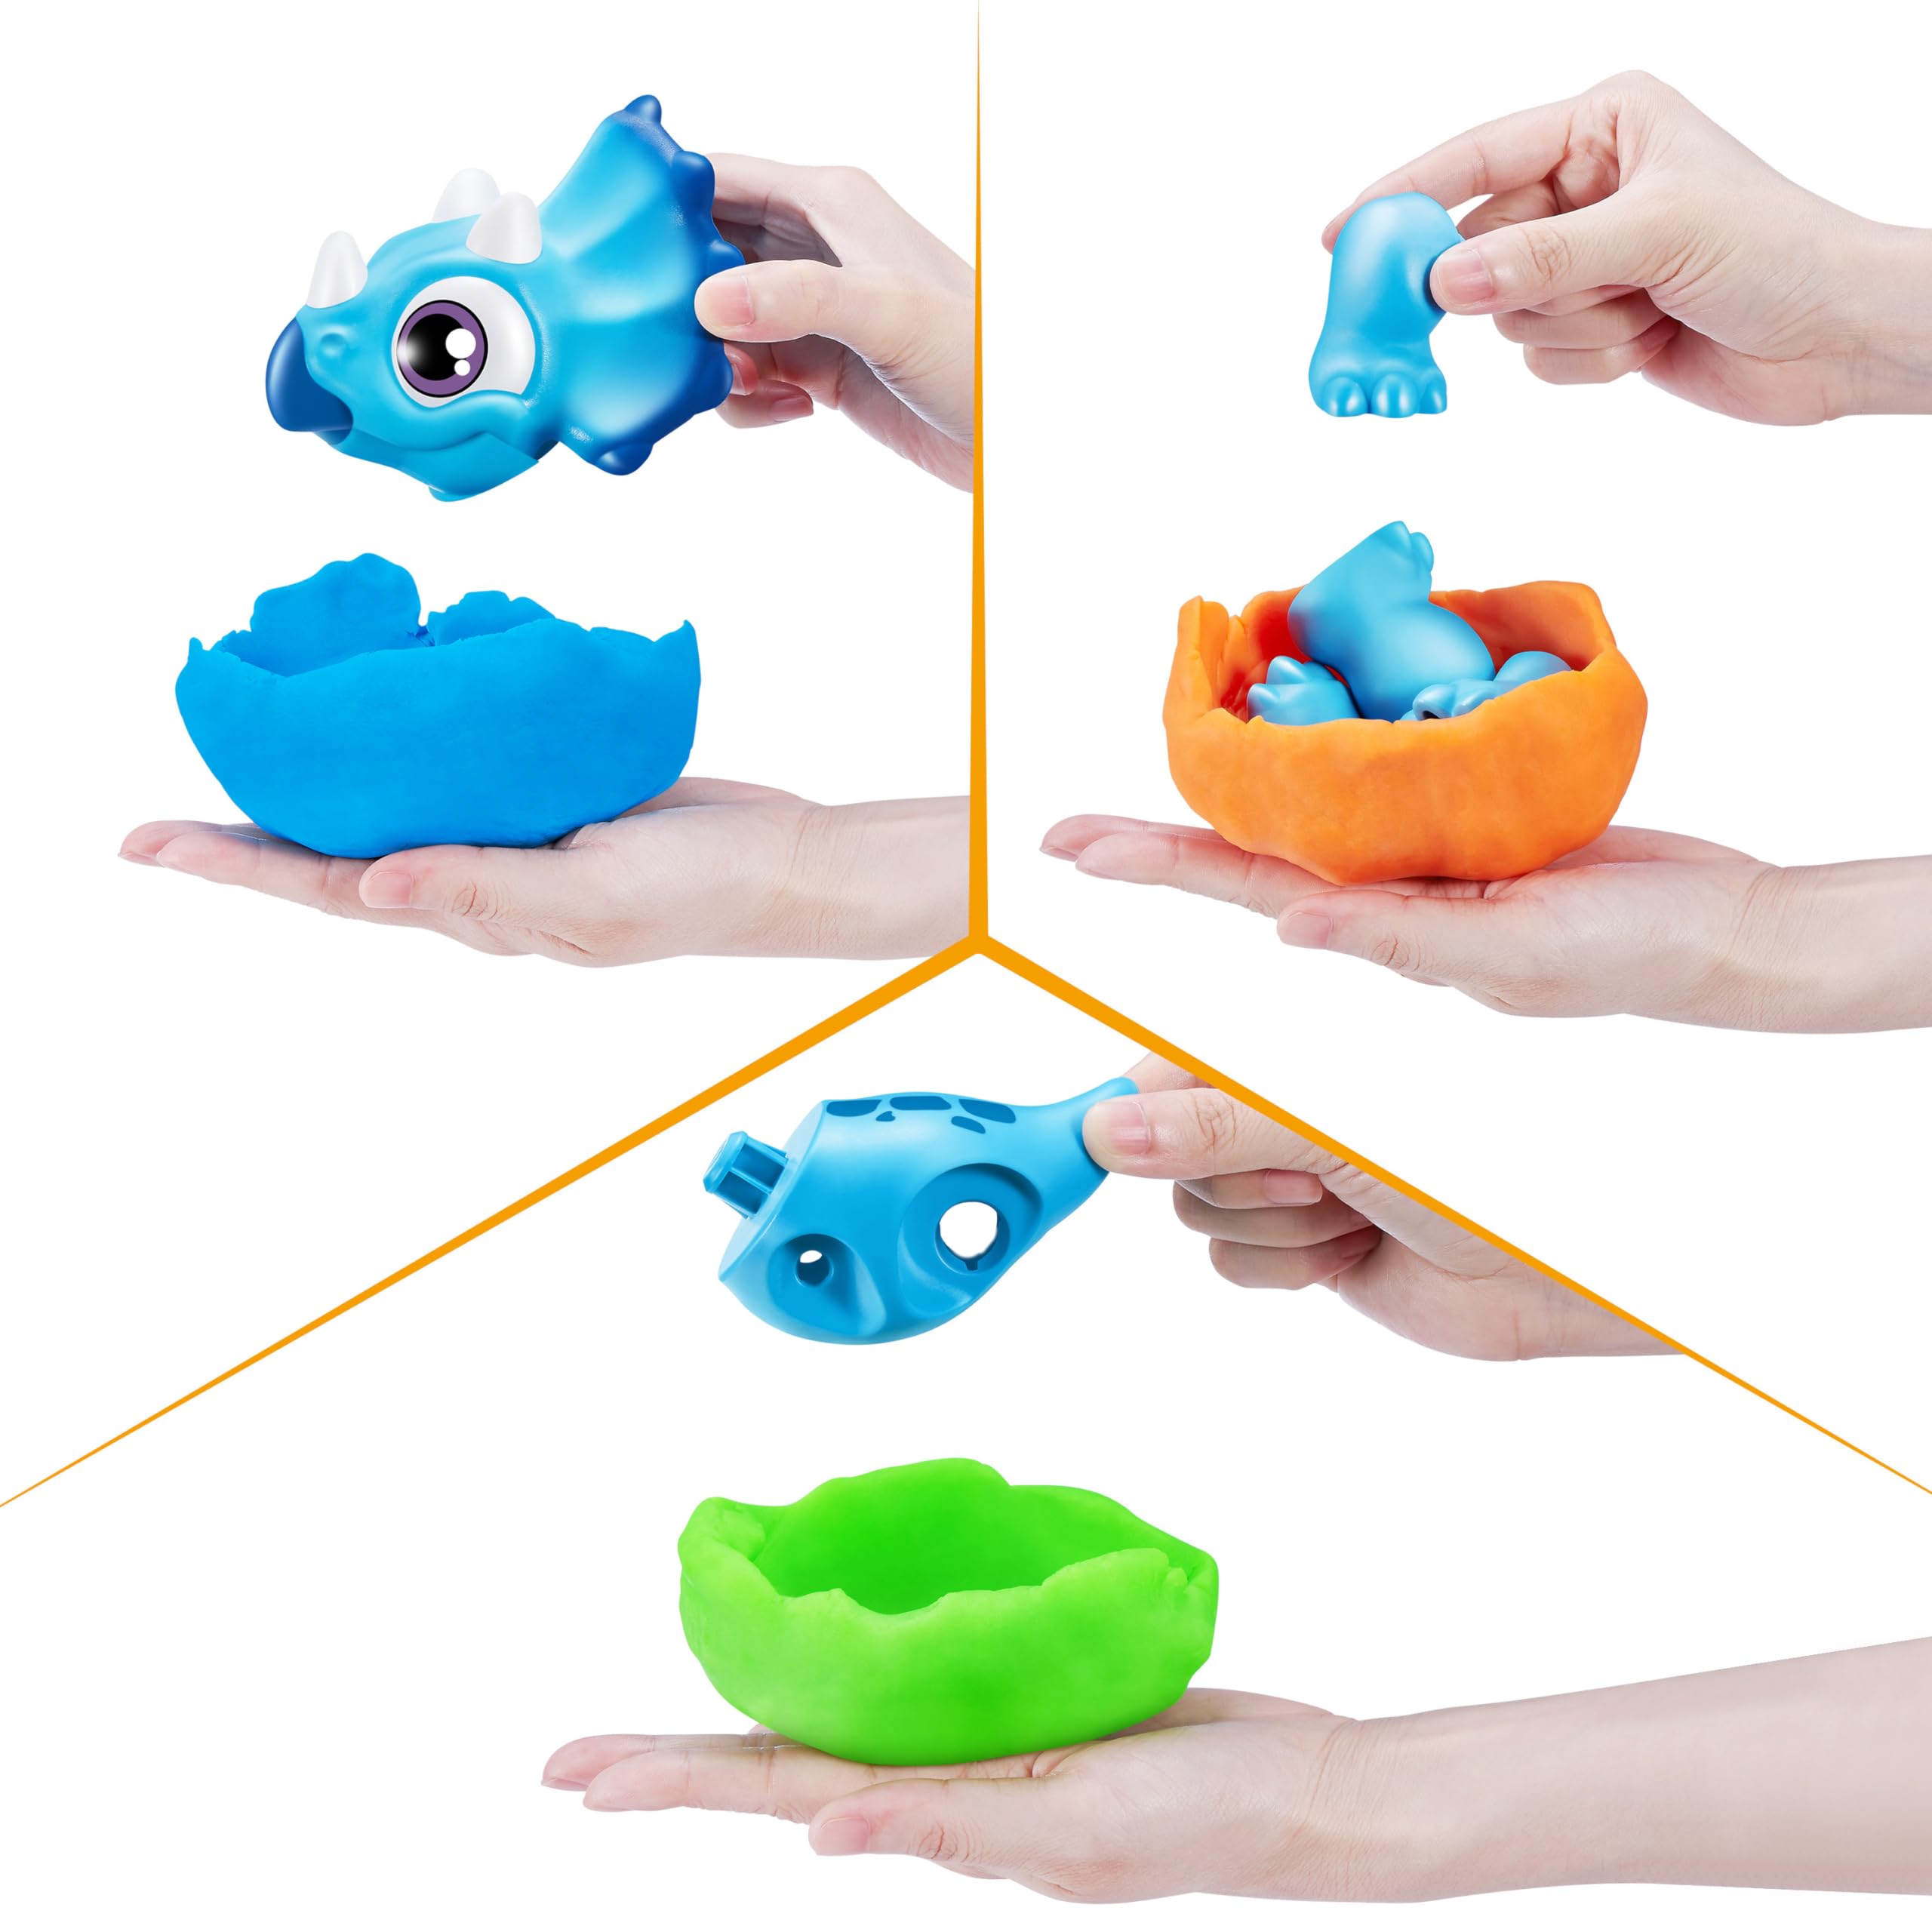 Smashers Junior Dino Dig Small Egg (Triceratops) by ZURU 12+ Surprises Compounds Mold Dinosaur Preschool Toys Build Construct Sensory Play 18 Months - 3 Years